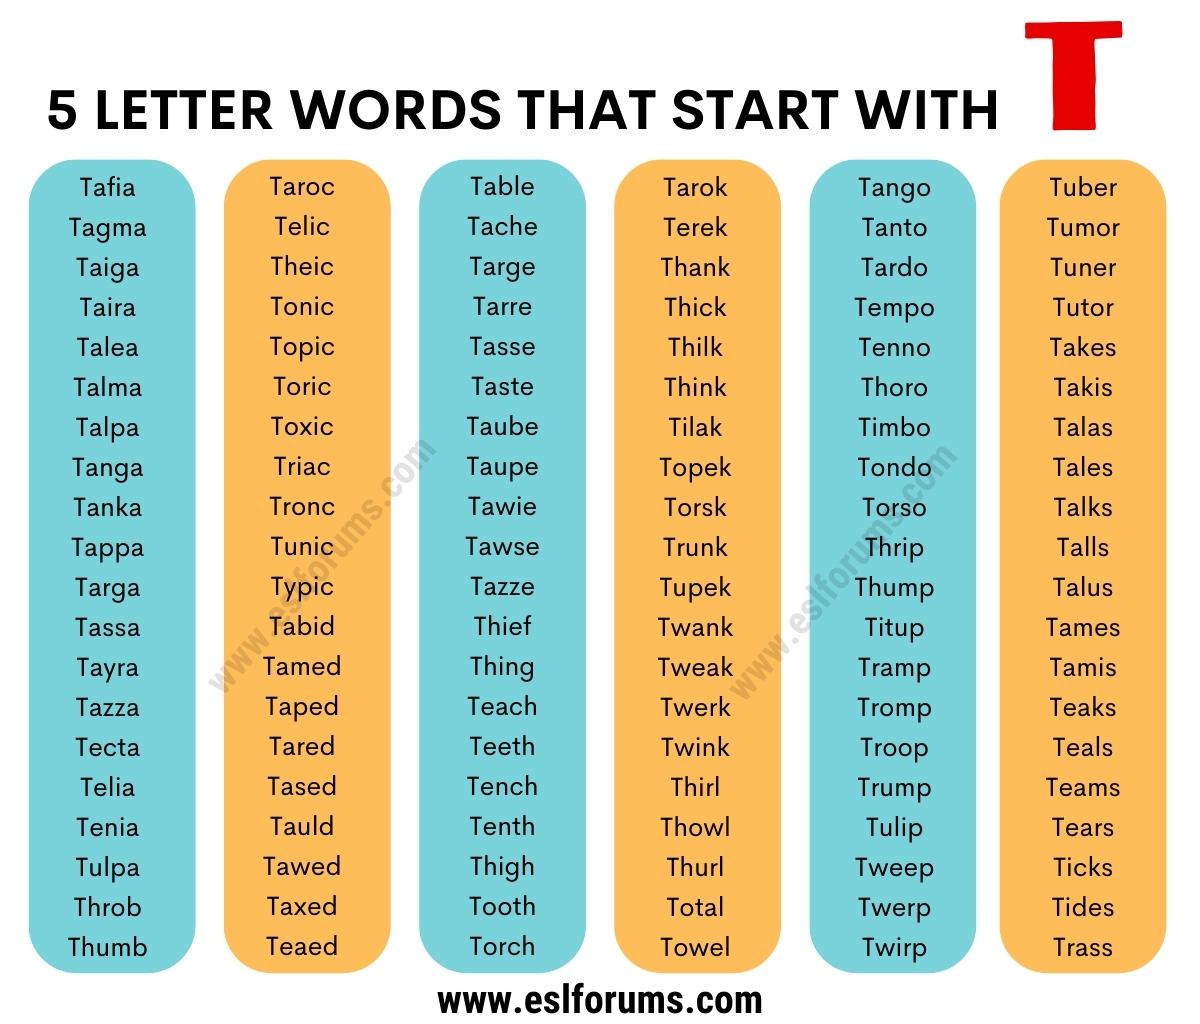 5 letter words starting with tat